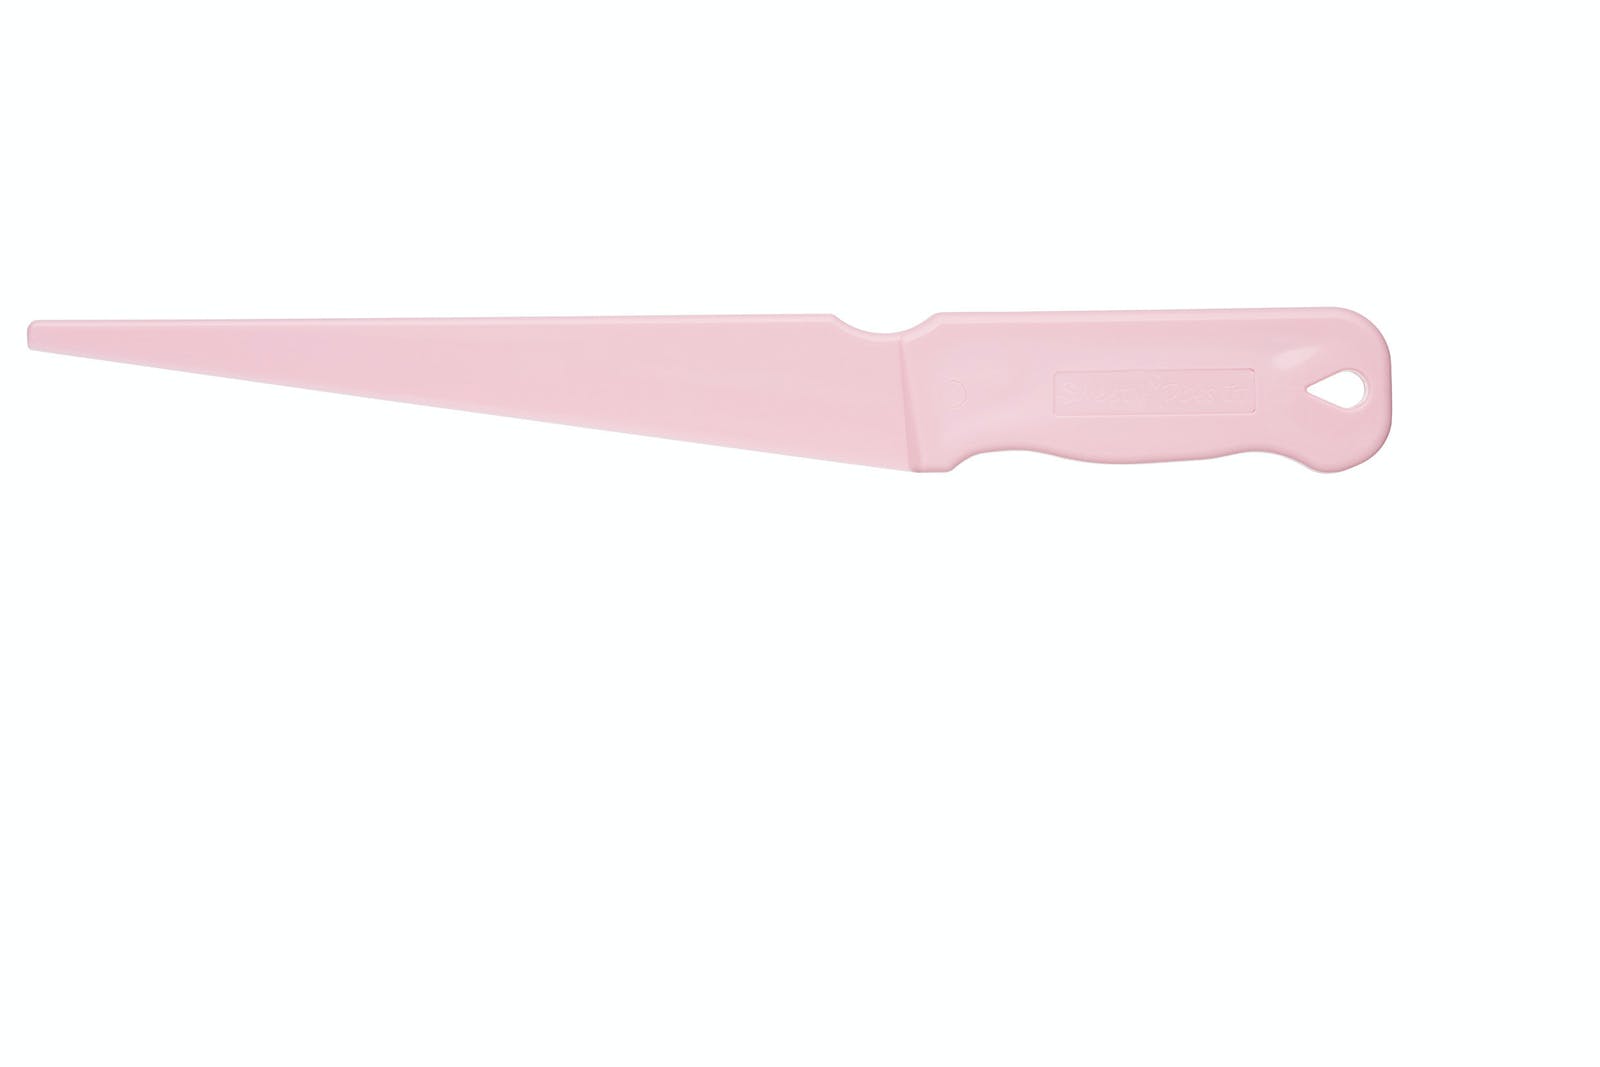 Sweetly Does It 30cm Sugar Cake Lace Icing Spatula Spreader - The Cooks Cupboard Ltd